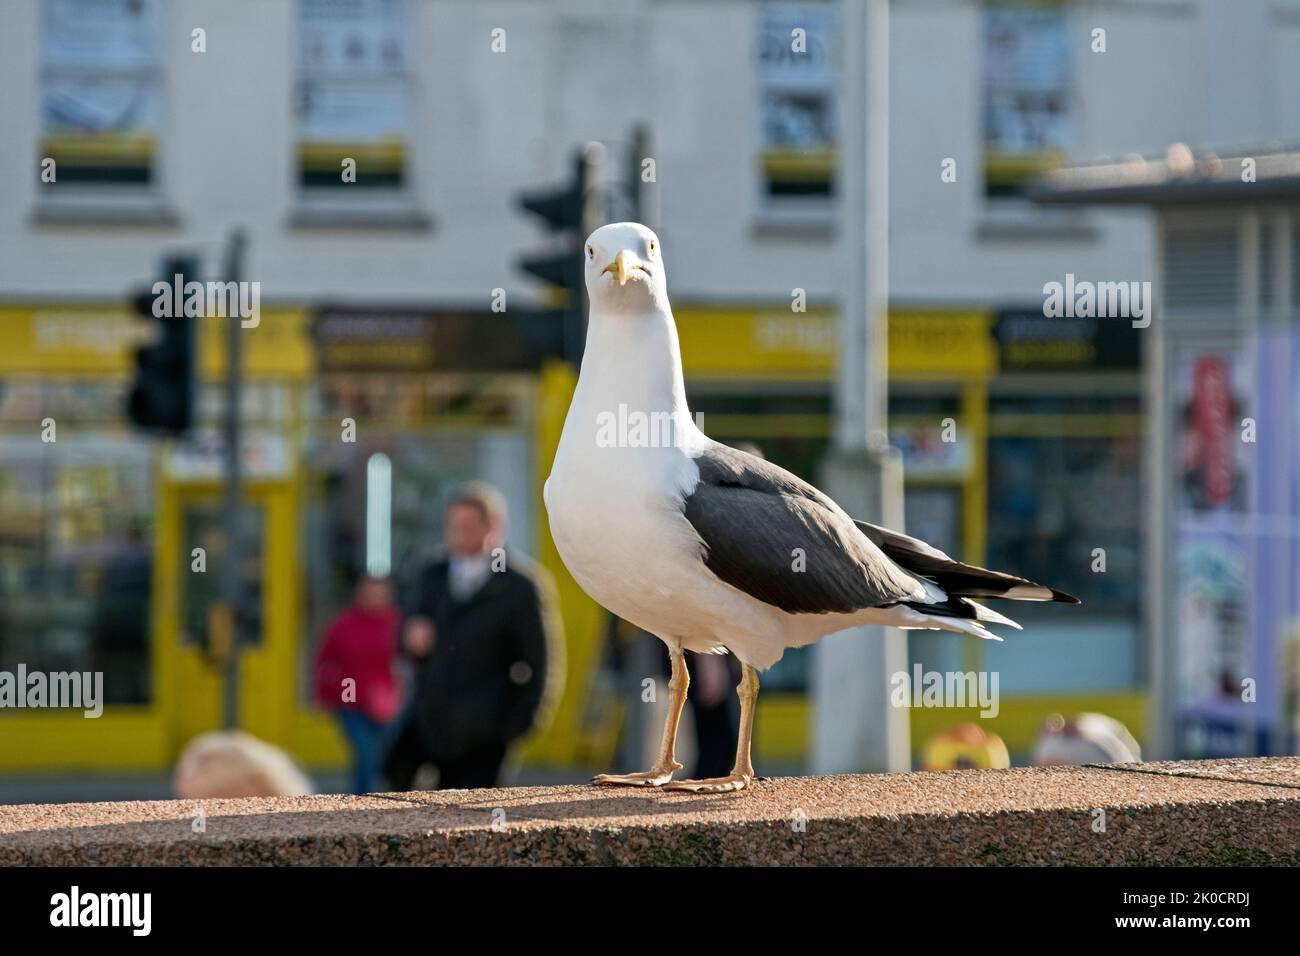 A herring gull (Larus argentatus) watches a photographer on a street in Bristol, UK Stock Photo